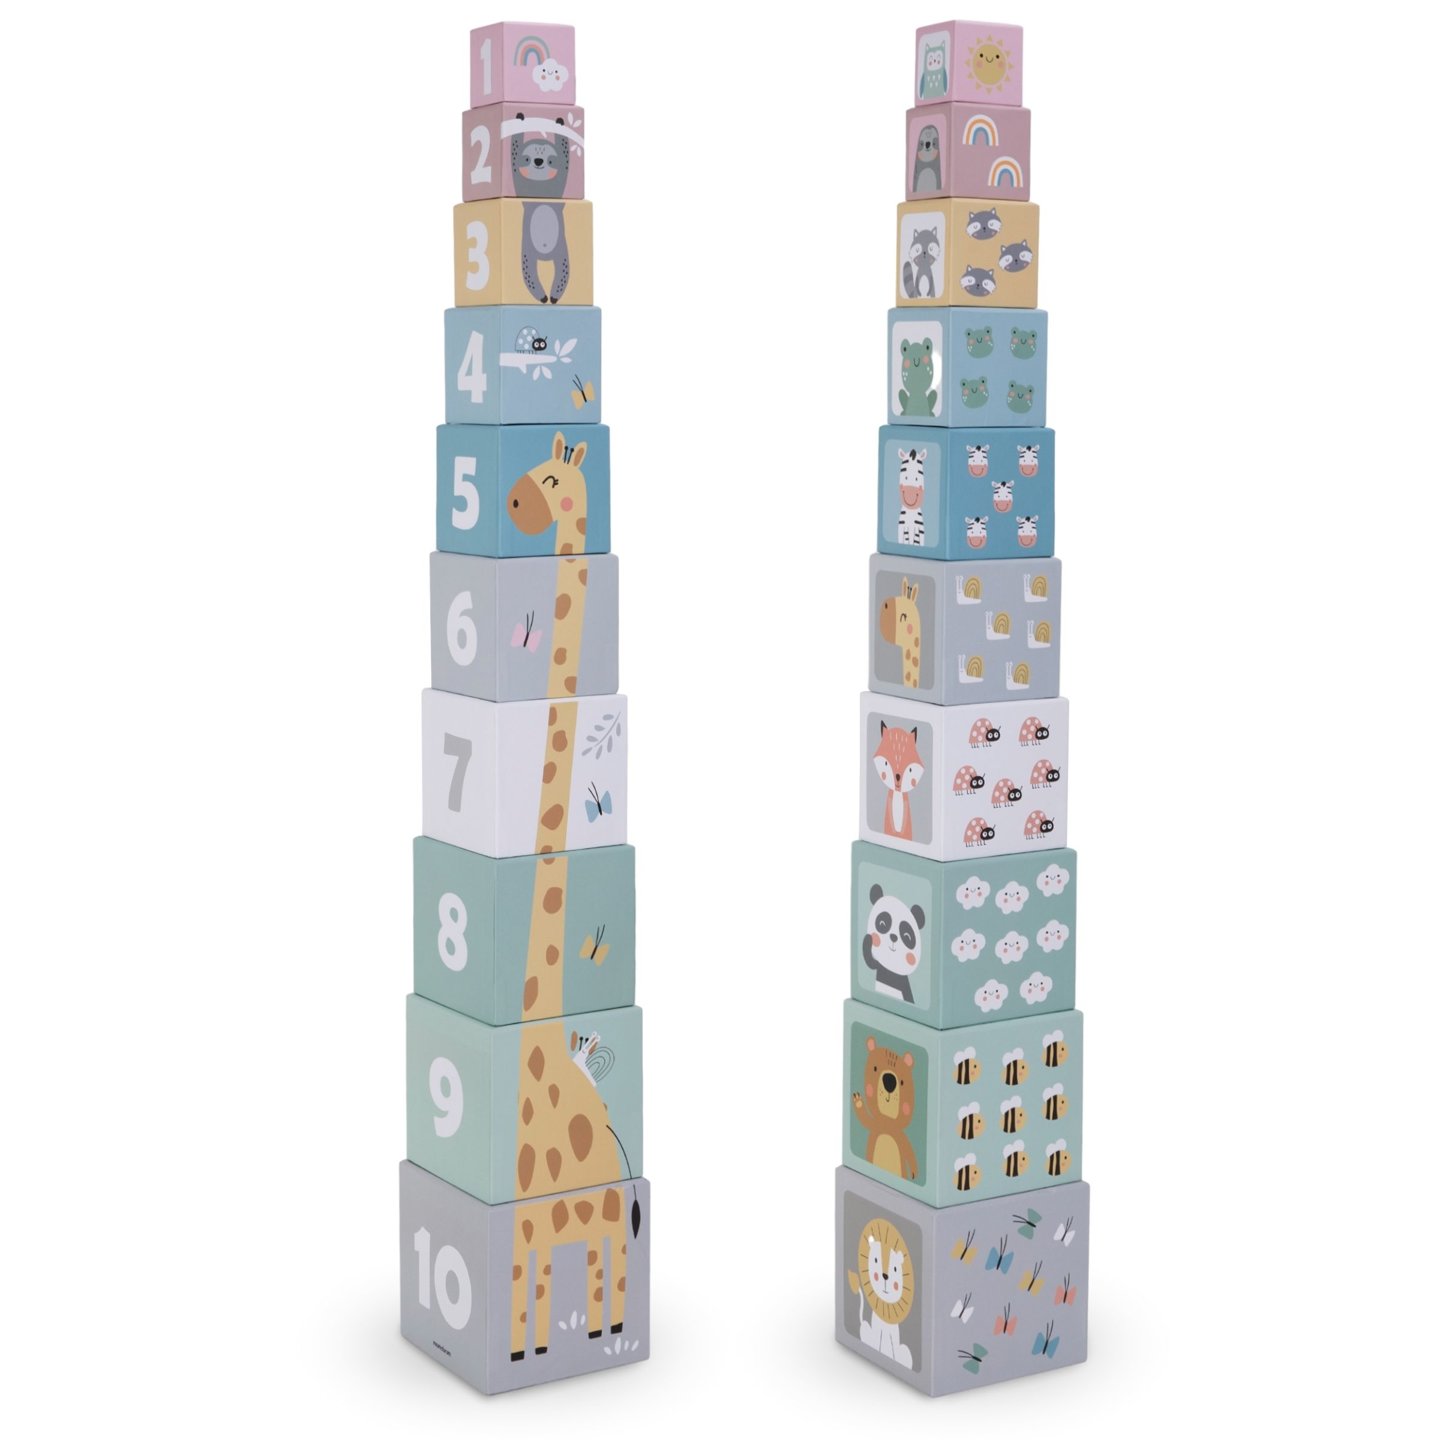 Stacking tower for children 10 pieces - numbers and animals